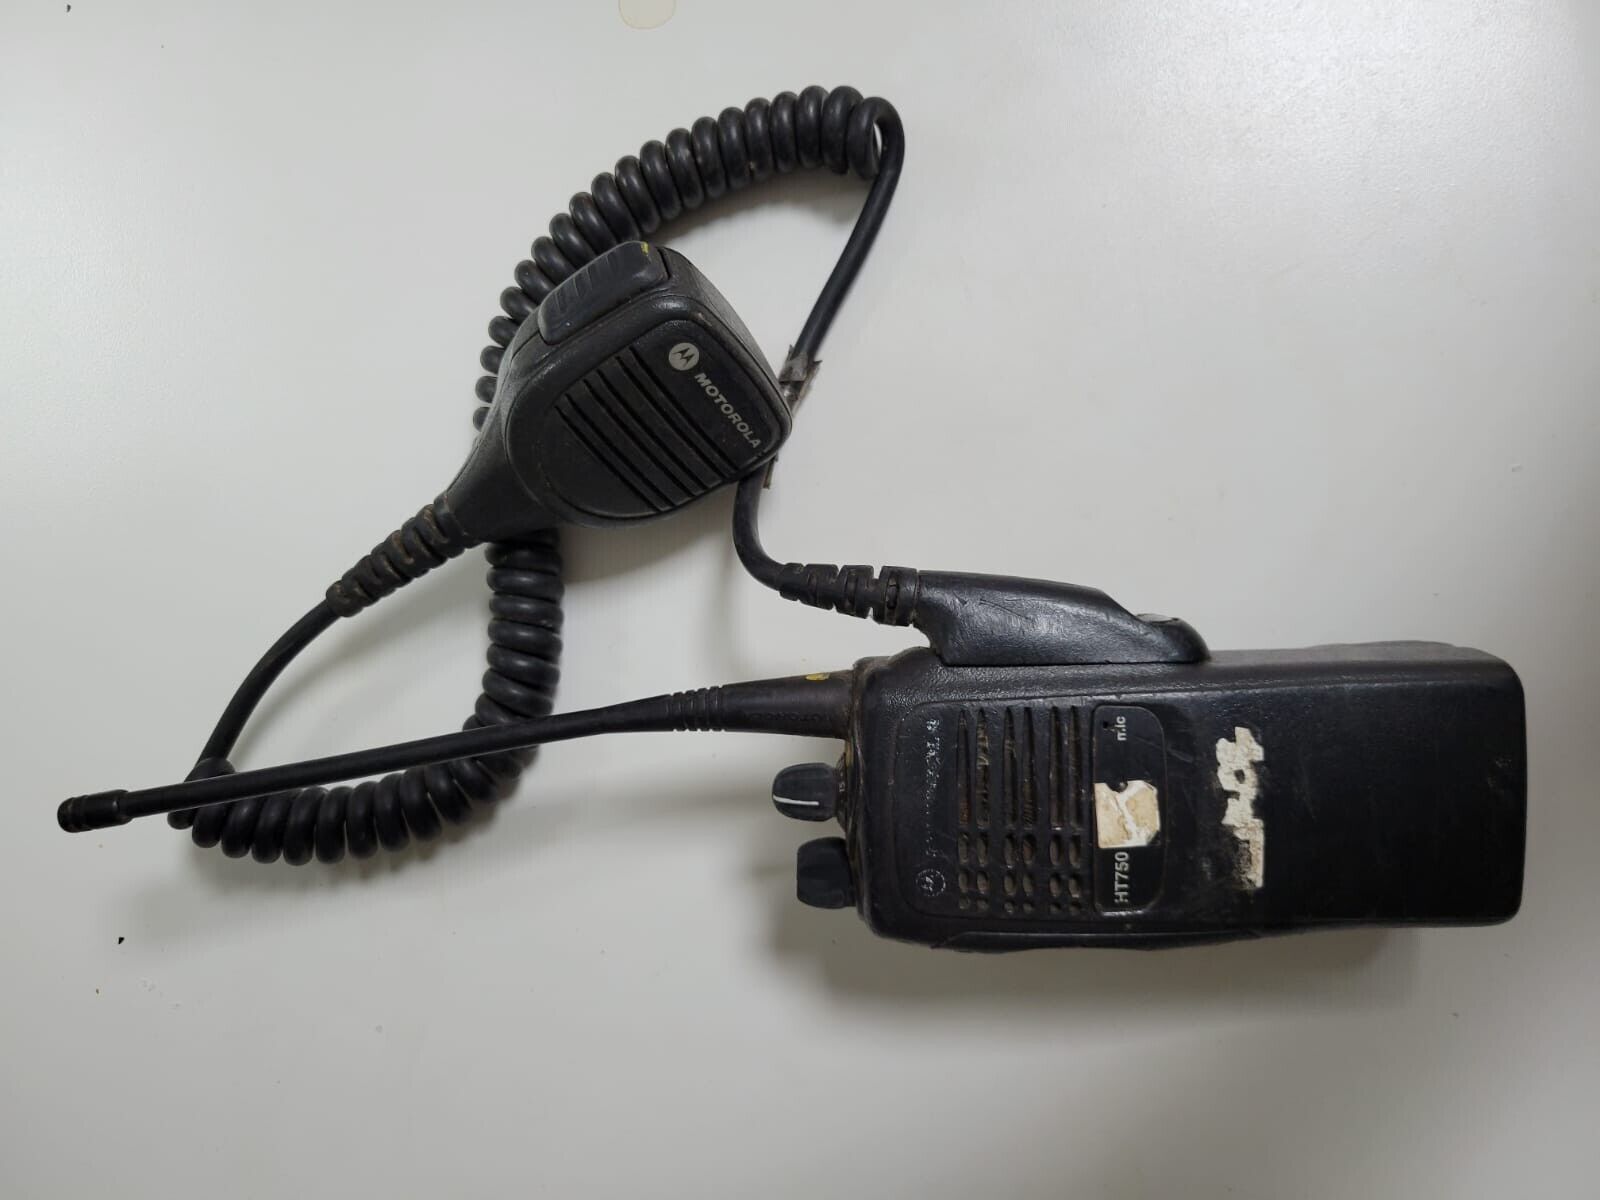 Set Of 20 Black Motorola Ht750 Walkie Talkies And Shoulder Mics With Chargers.